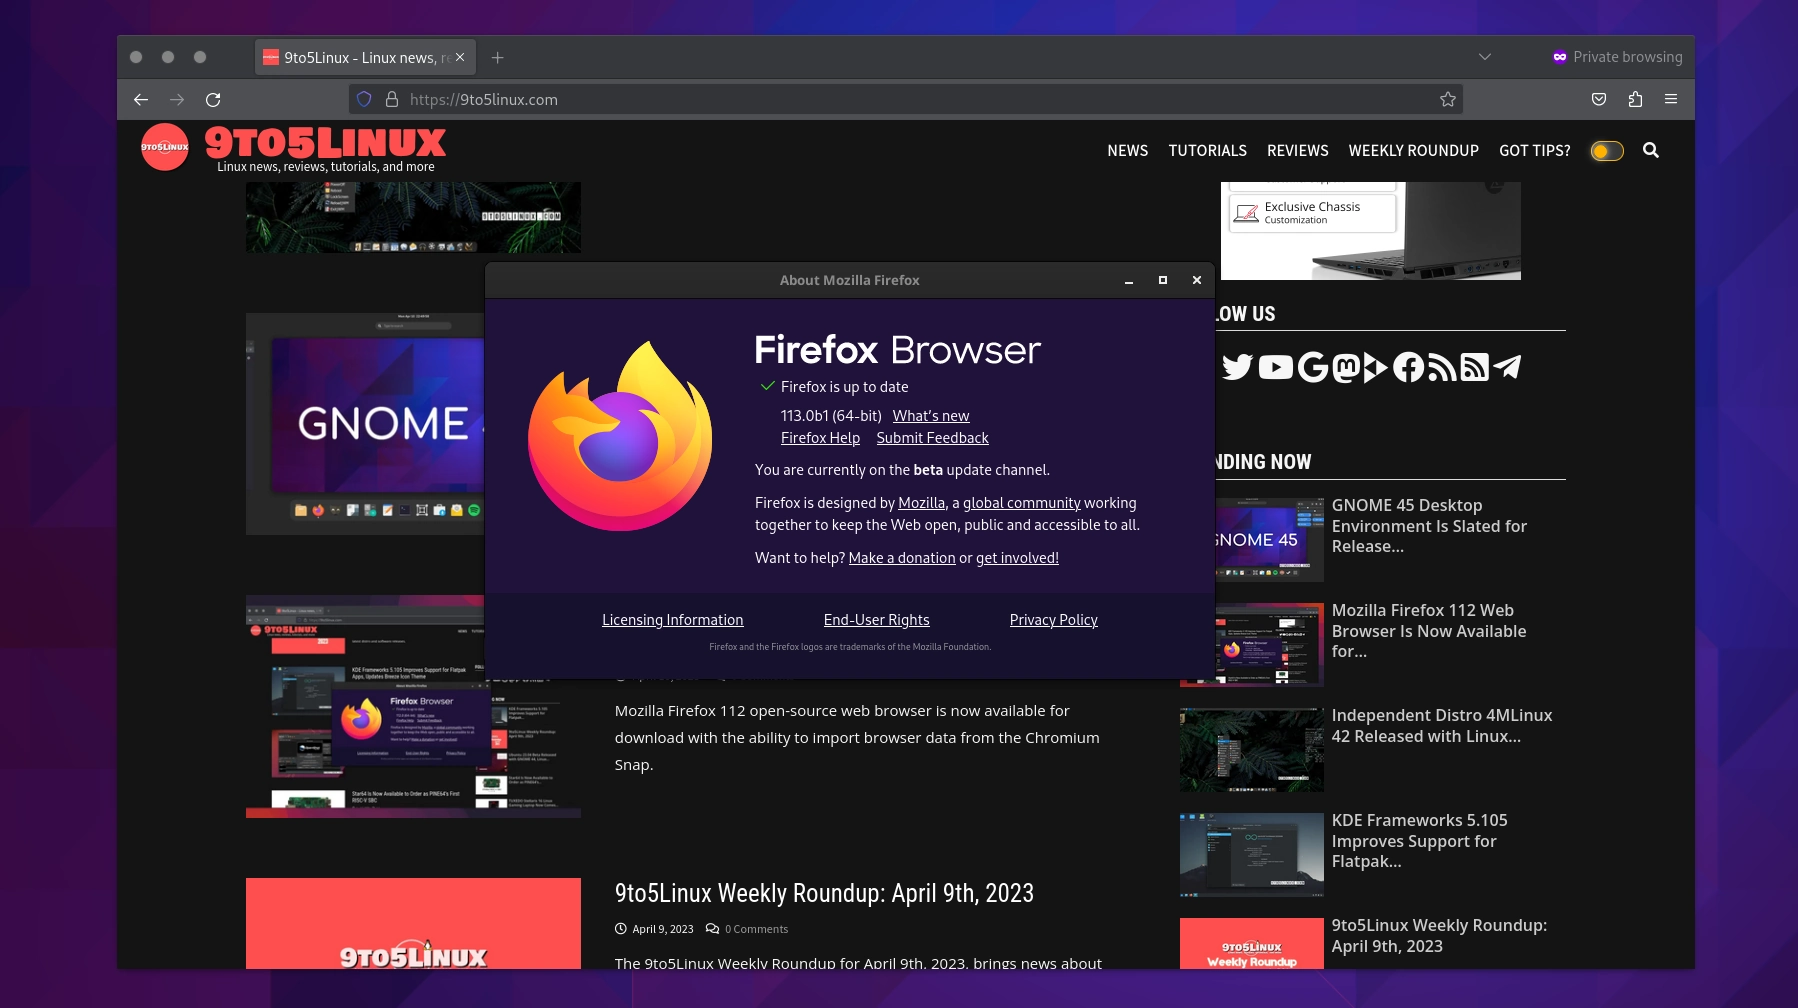 Firefox 113 Promises Support for Animated AV1 Images, Debian Package, and More